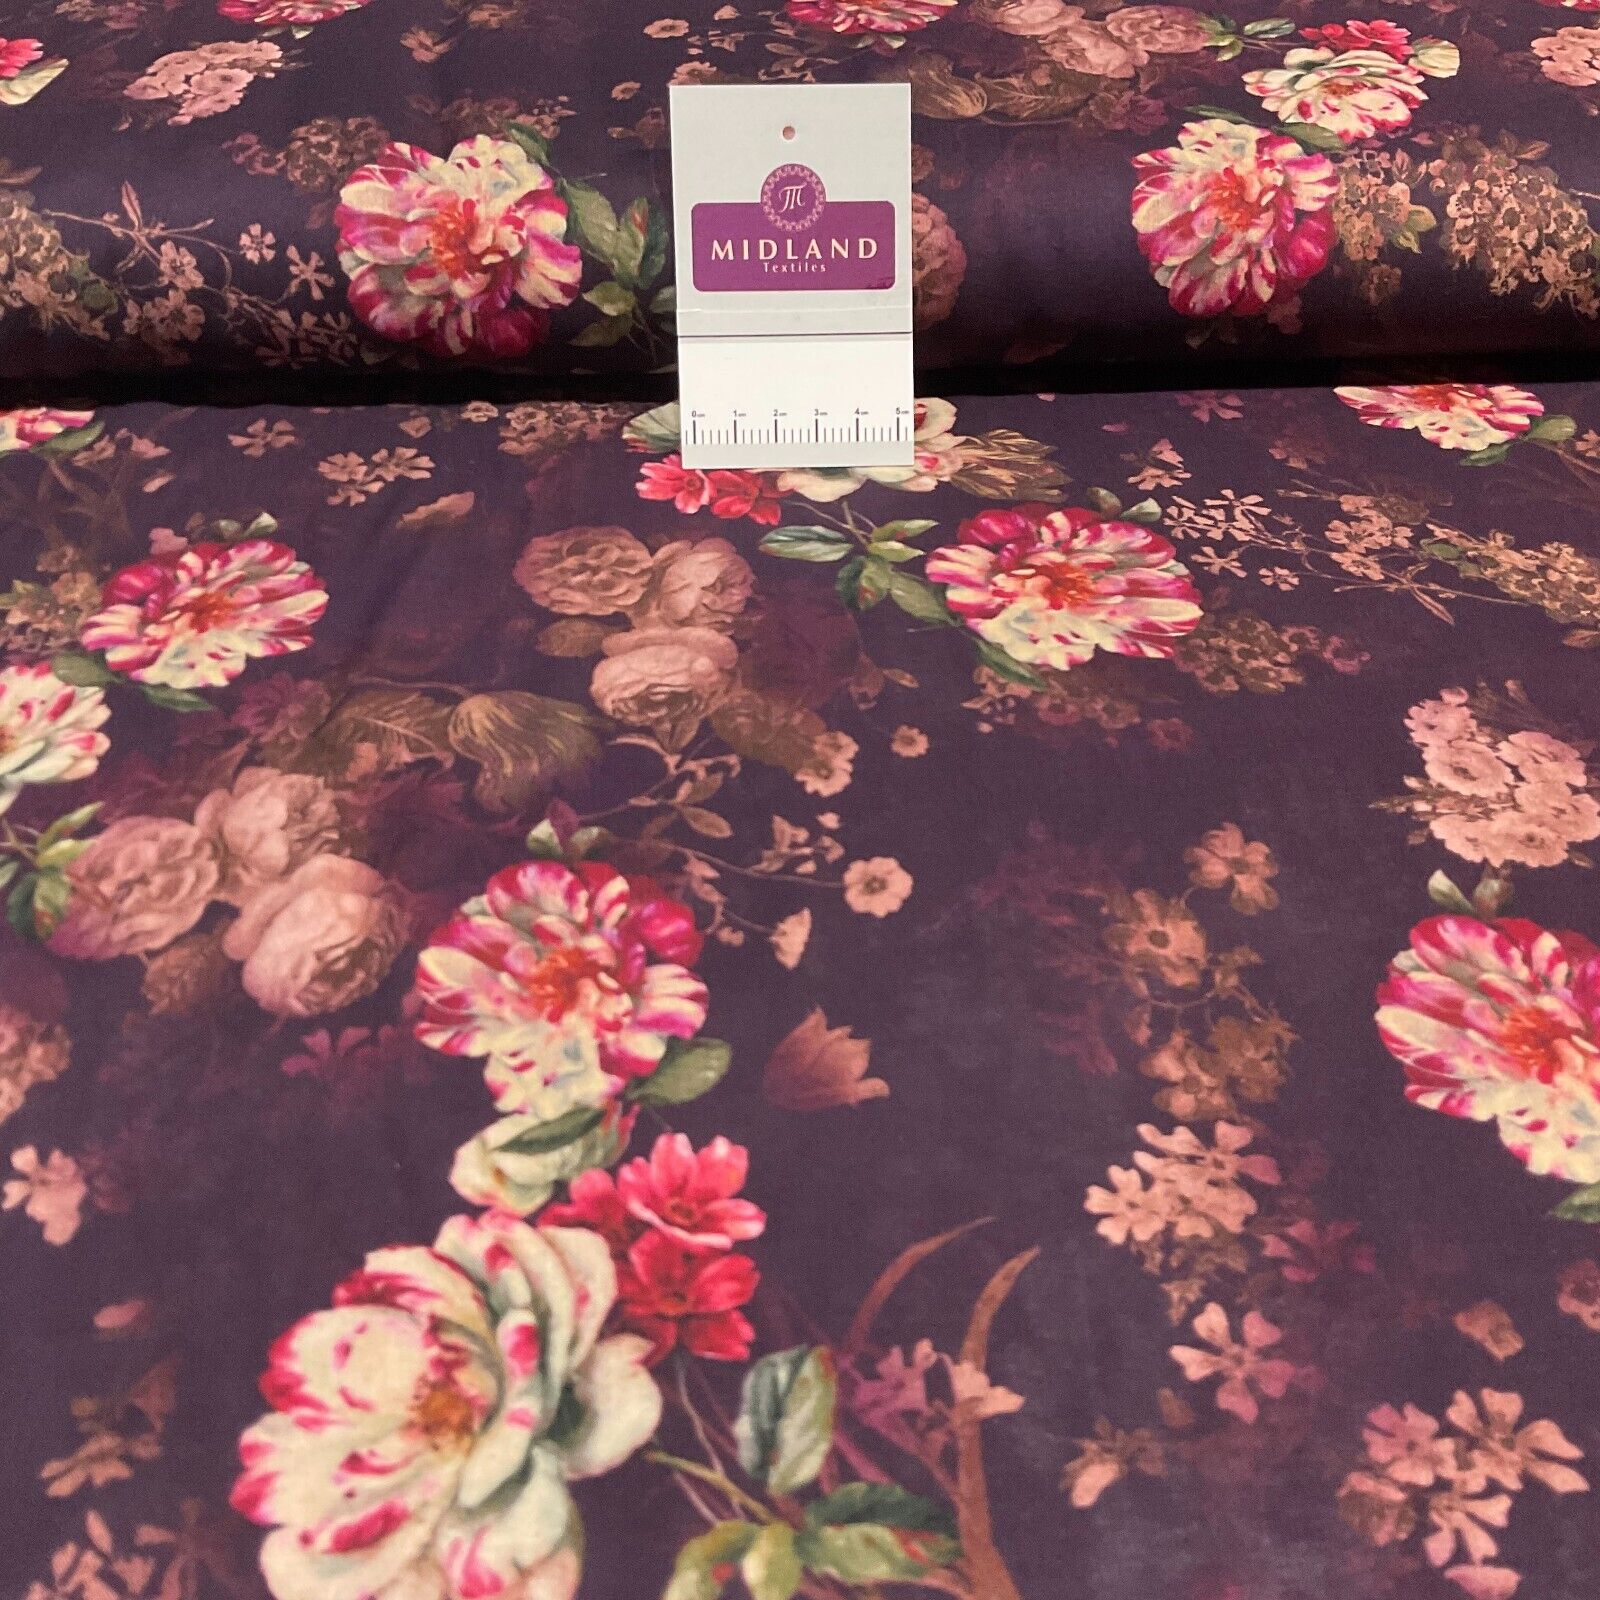 Cotton Lawn Summer Vintage Floral Printed Dress fabric 100% M1670